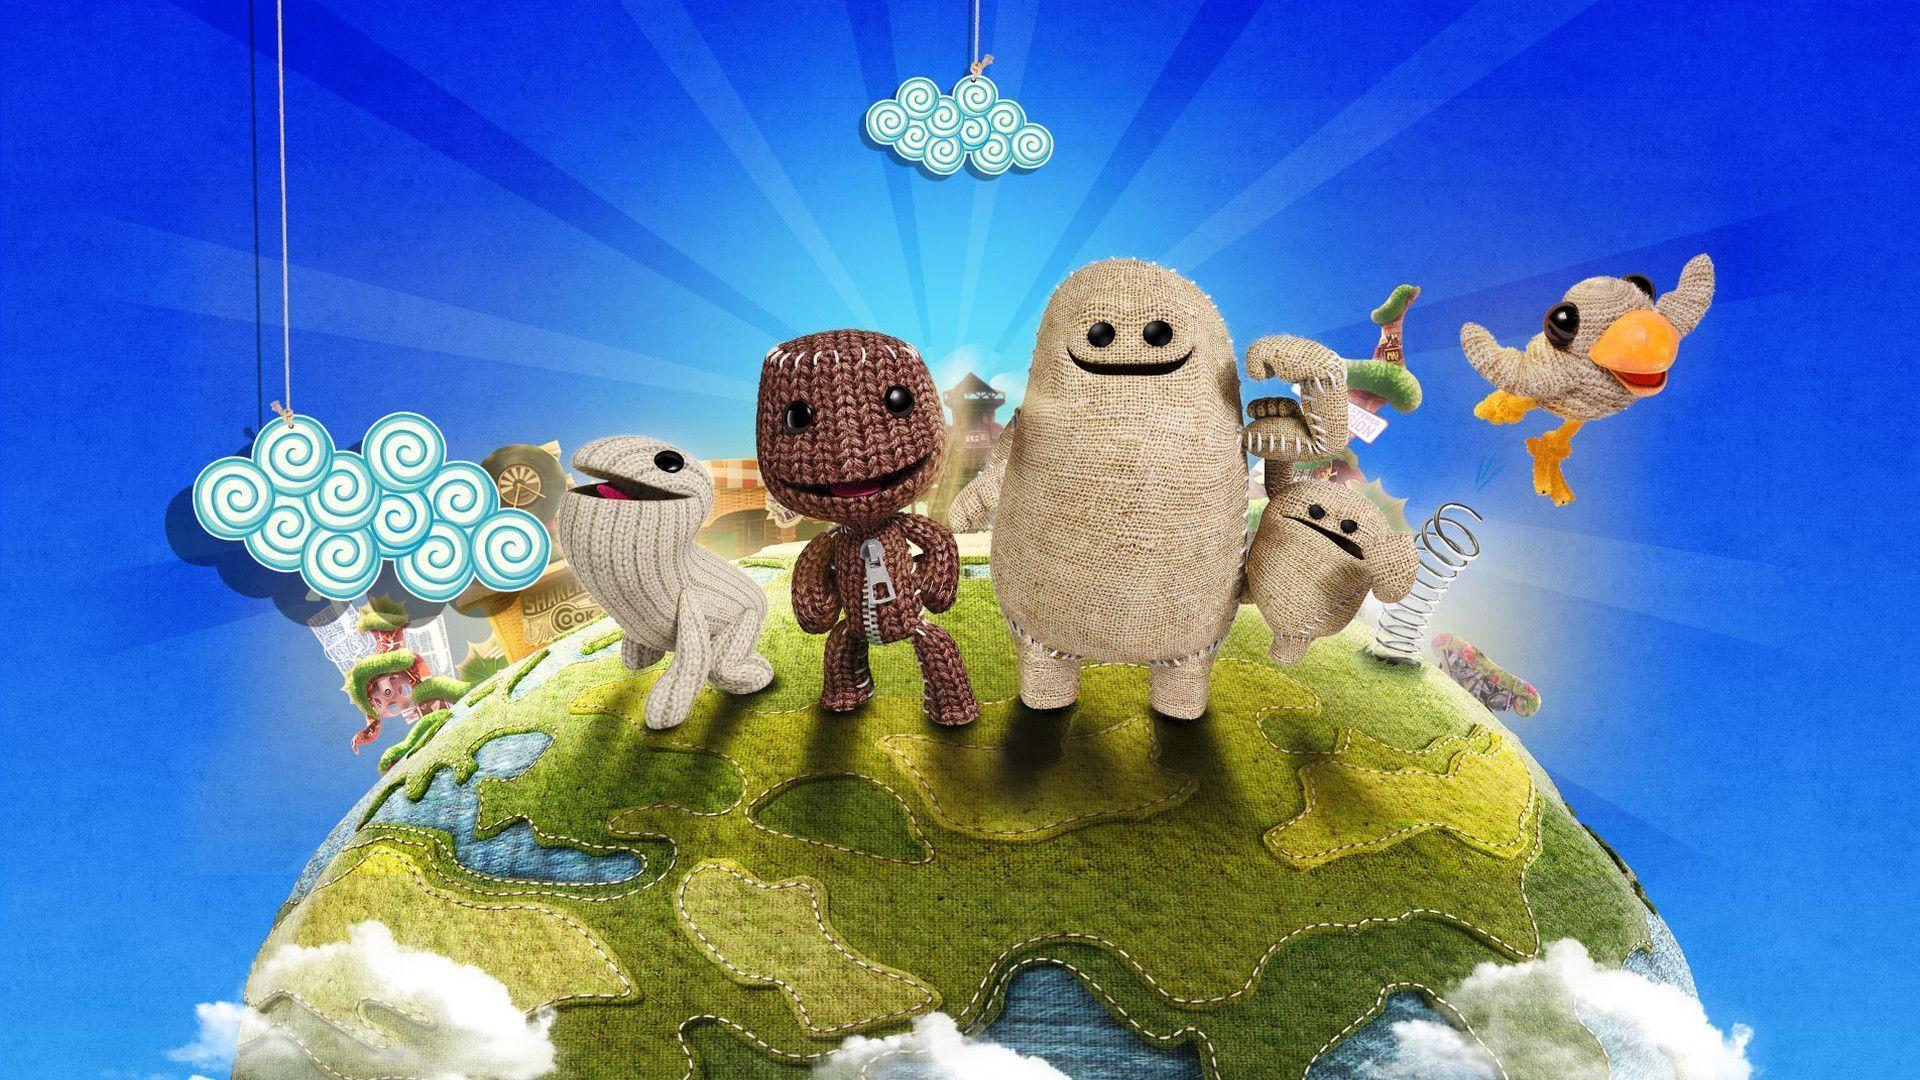 Gaming Little Big Planet 3 discussion thread. Discussion